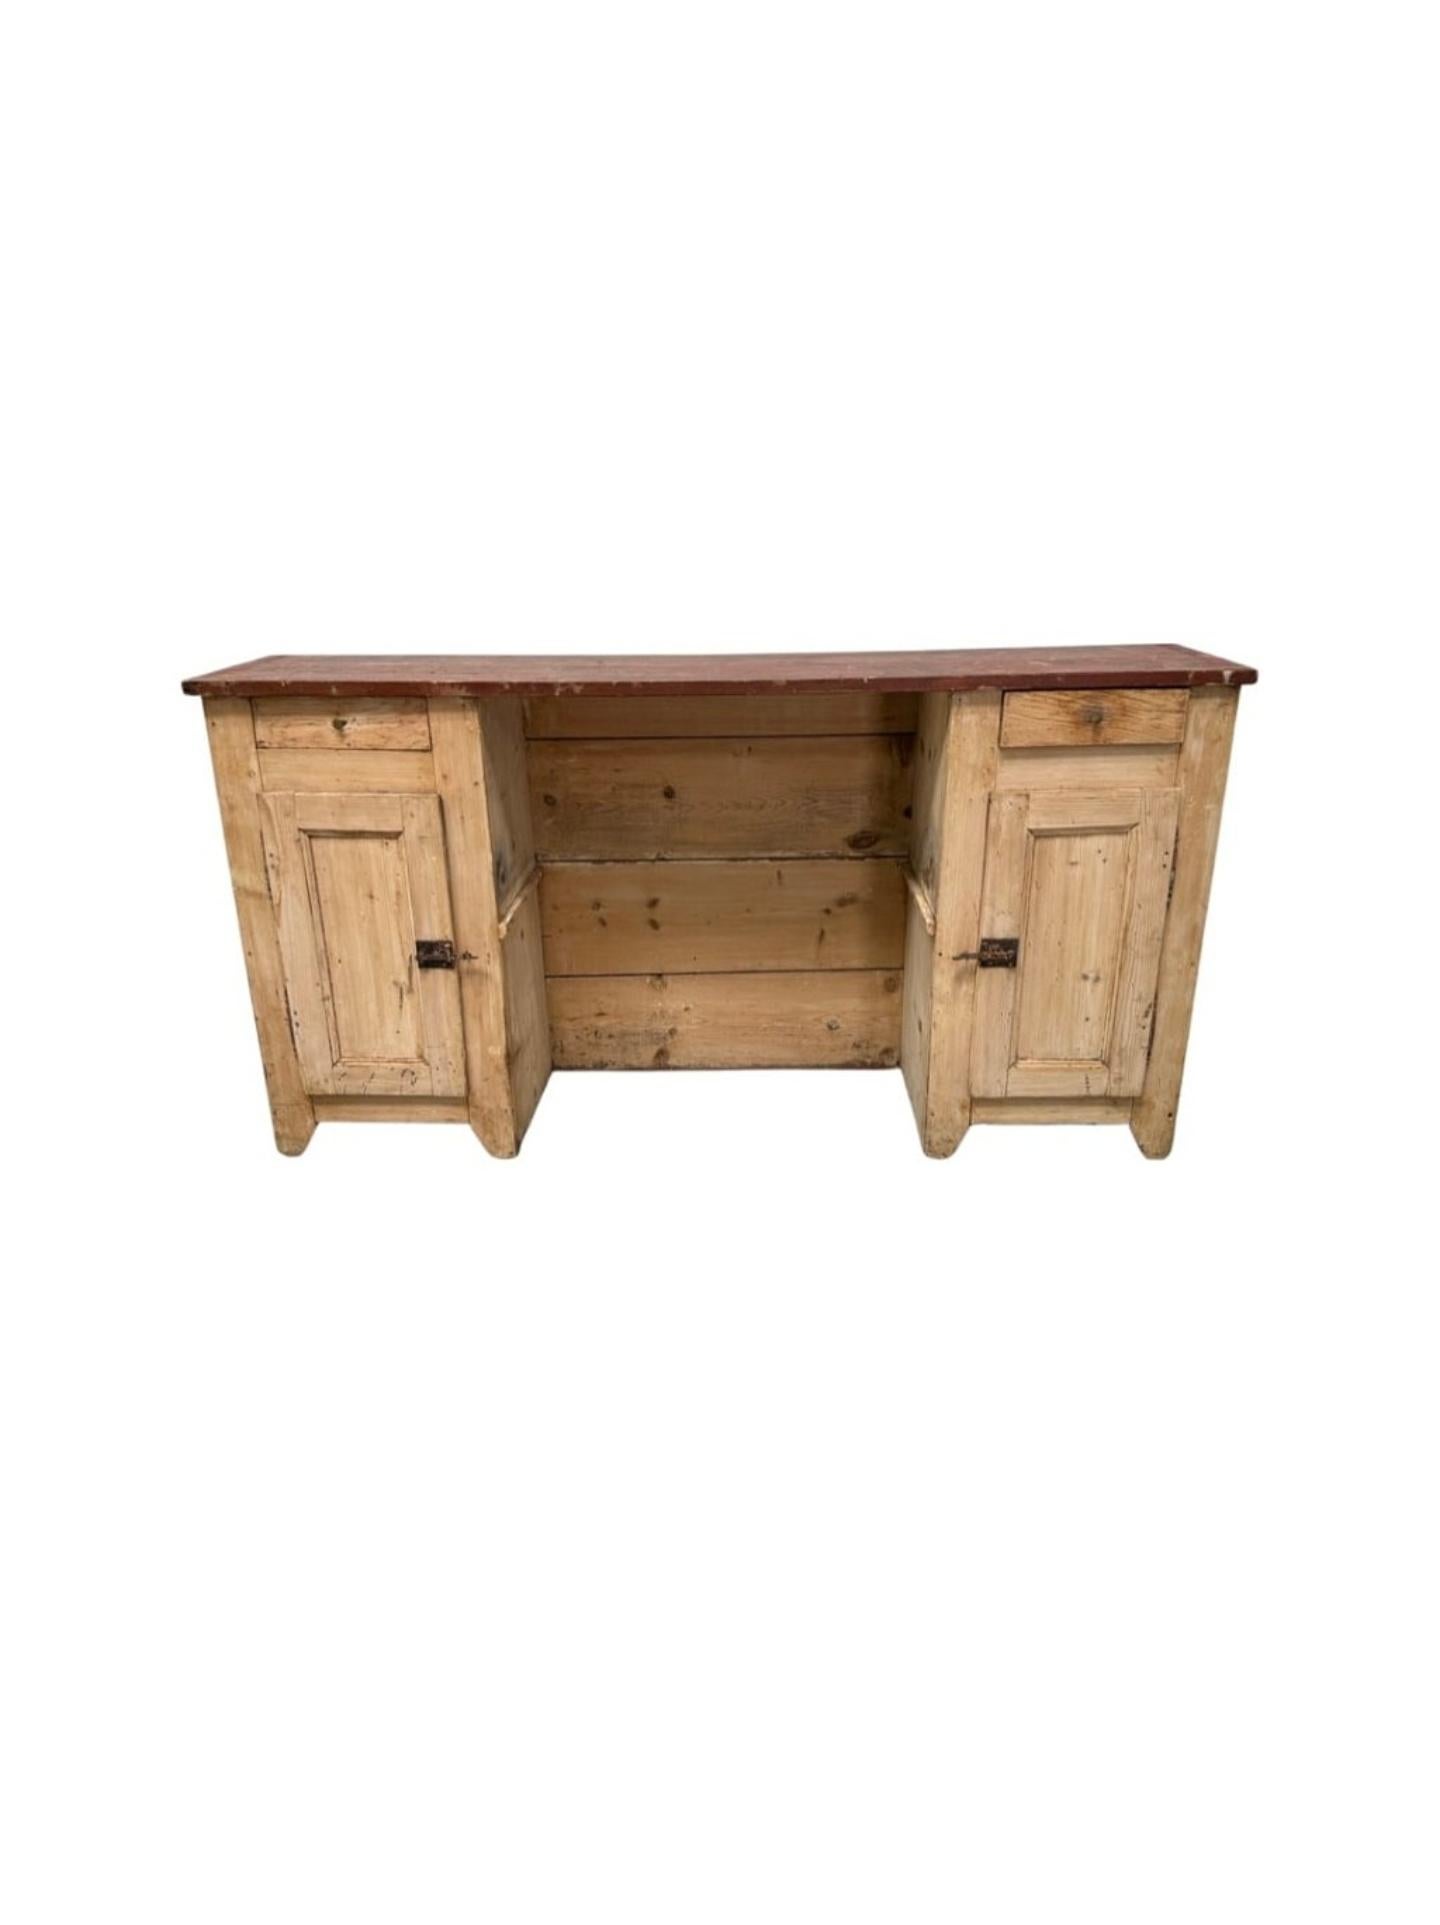 A scarce early American painted pine barbershop back bar. circa 1840

Born in the United States in the first half of the 19th century, this remarkable rare antique barber station features primitive hand-crafted solid wood construction, retaining the